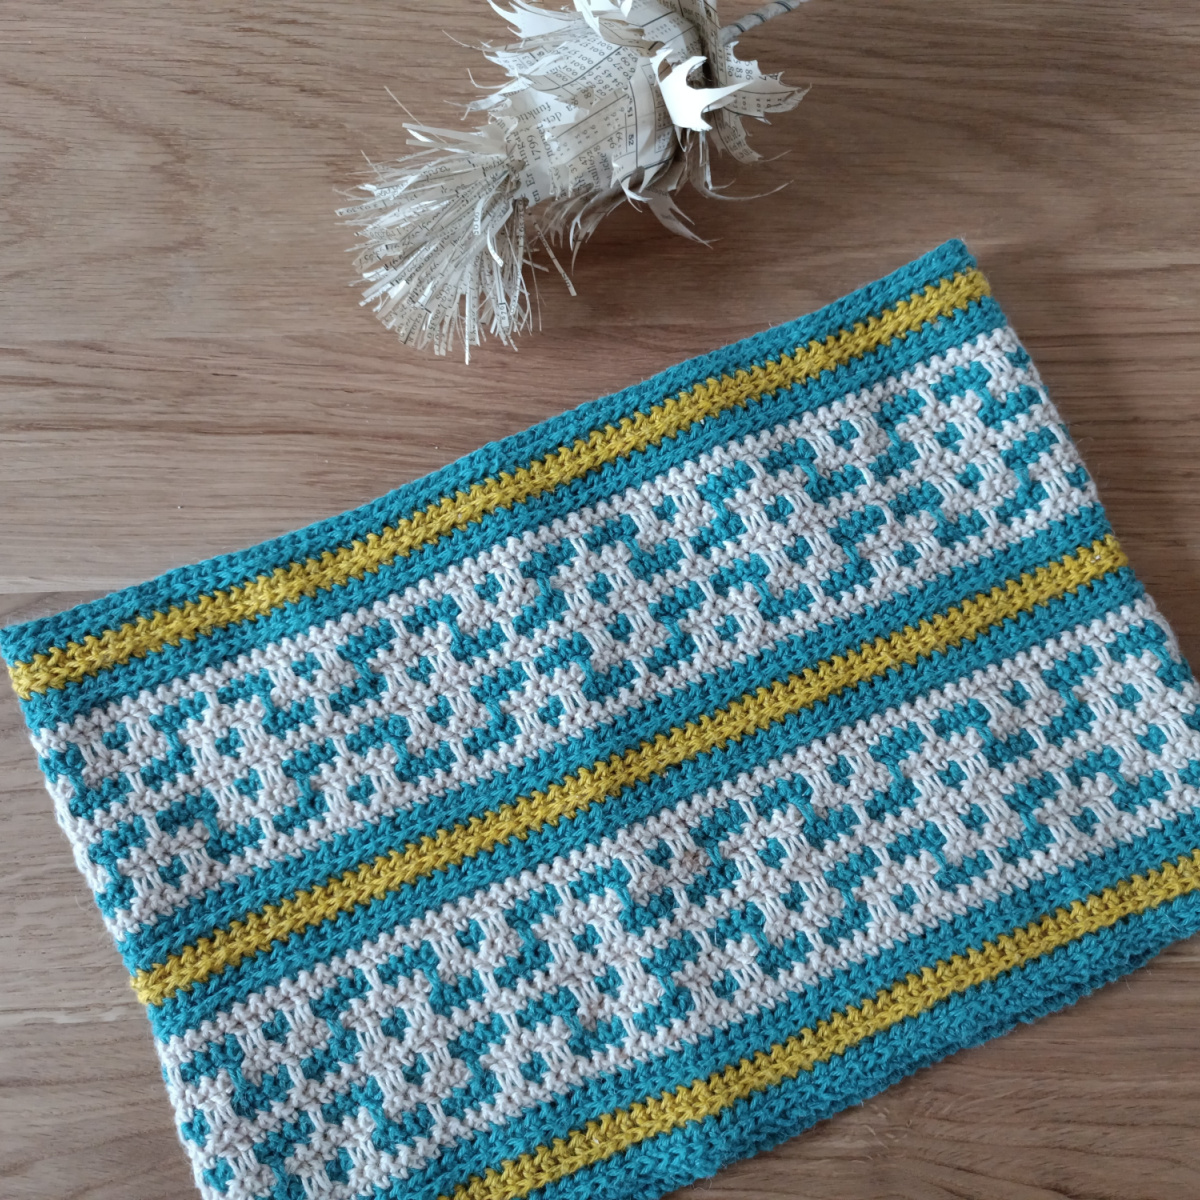 The Maya cowl – a fun and quick project!